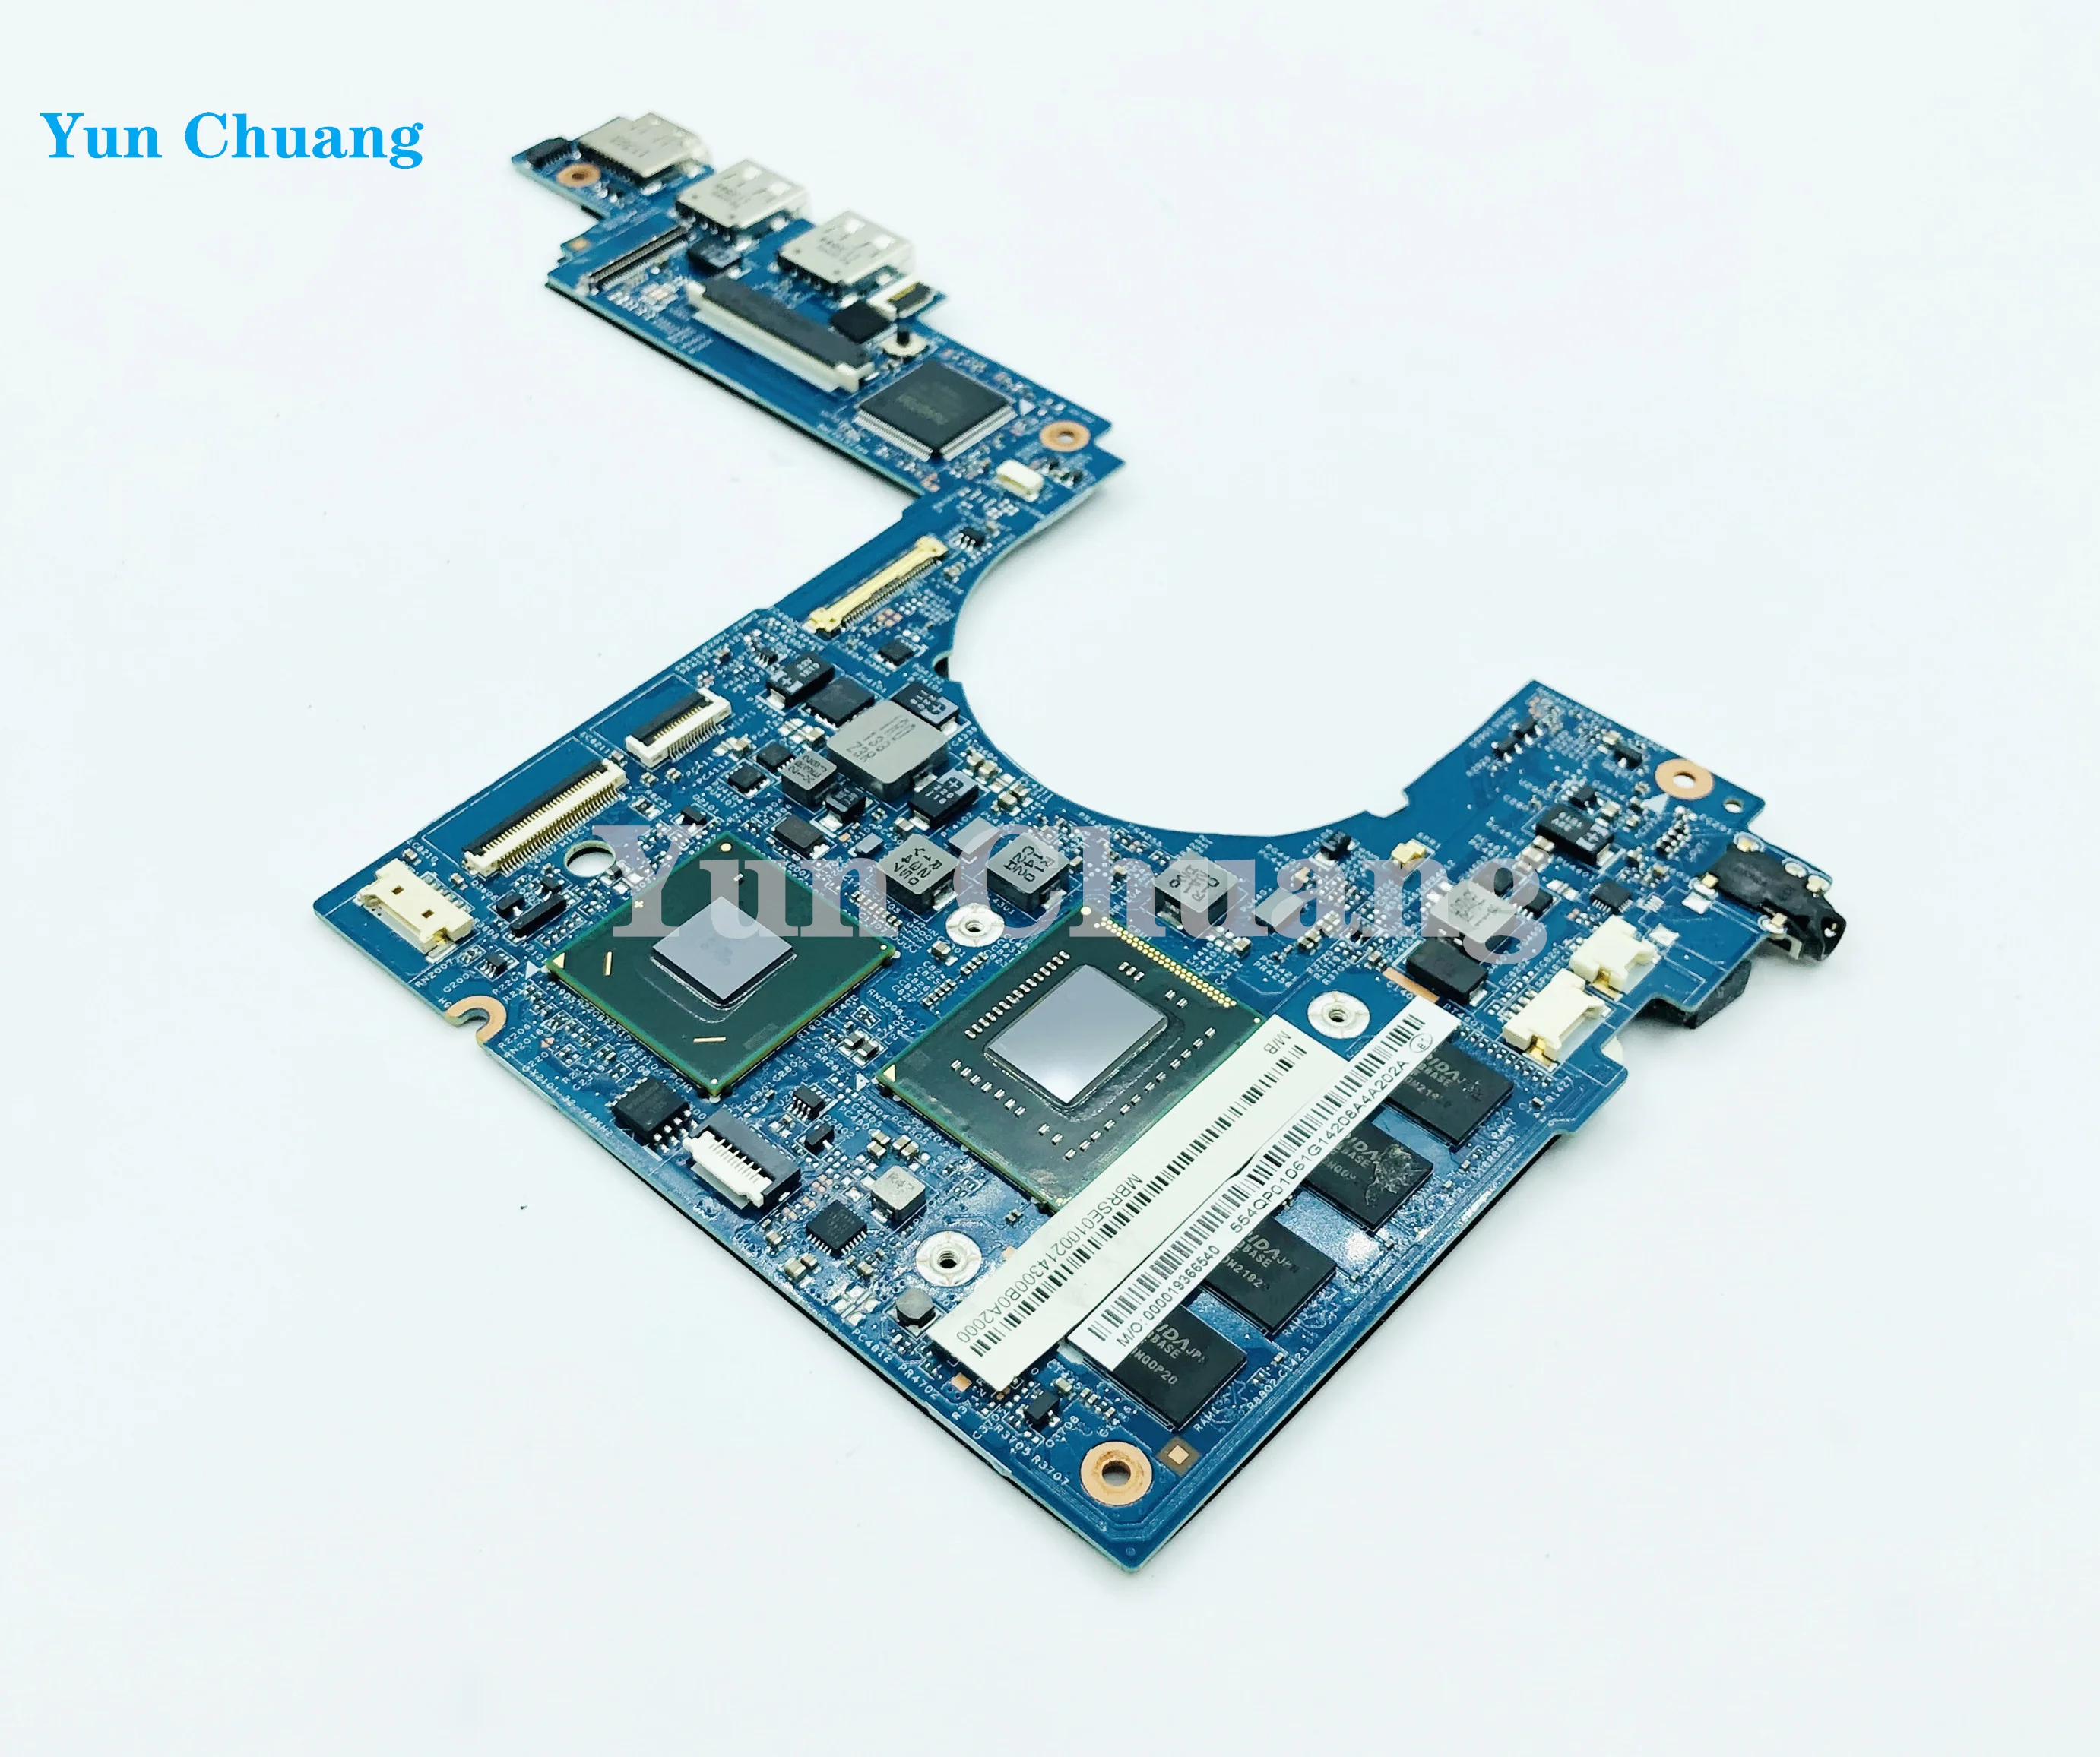 Mbrse01002 For Acer Aspire S3 S3-951 S3-391 Laptop Motherboard 48.4qp03.021 I5-2467m Ddr3 Tested Laptop Motherboard AliExpress